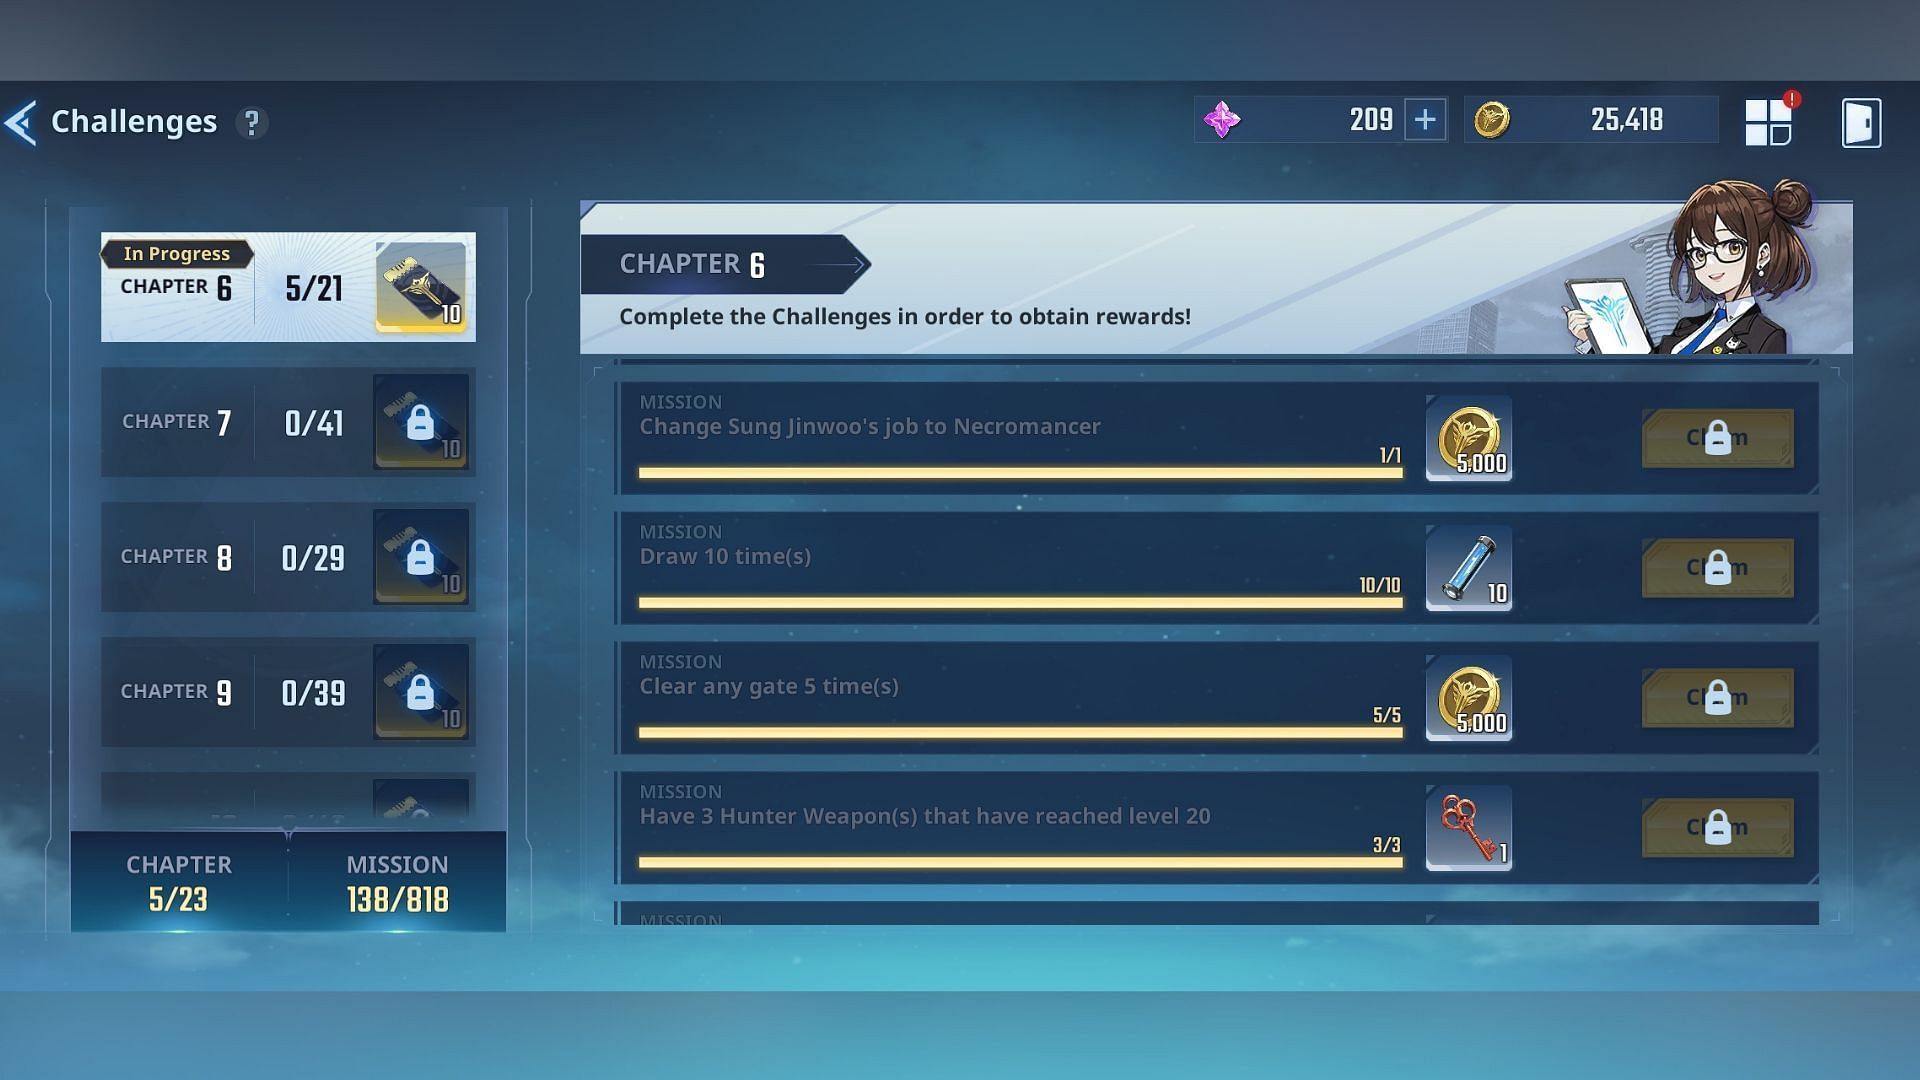 Complete various missions in each chapter of Challenges to get Weapon Enhancement Gears (Image via Netmarble)